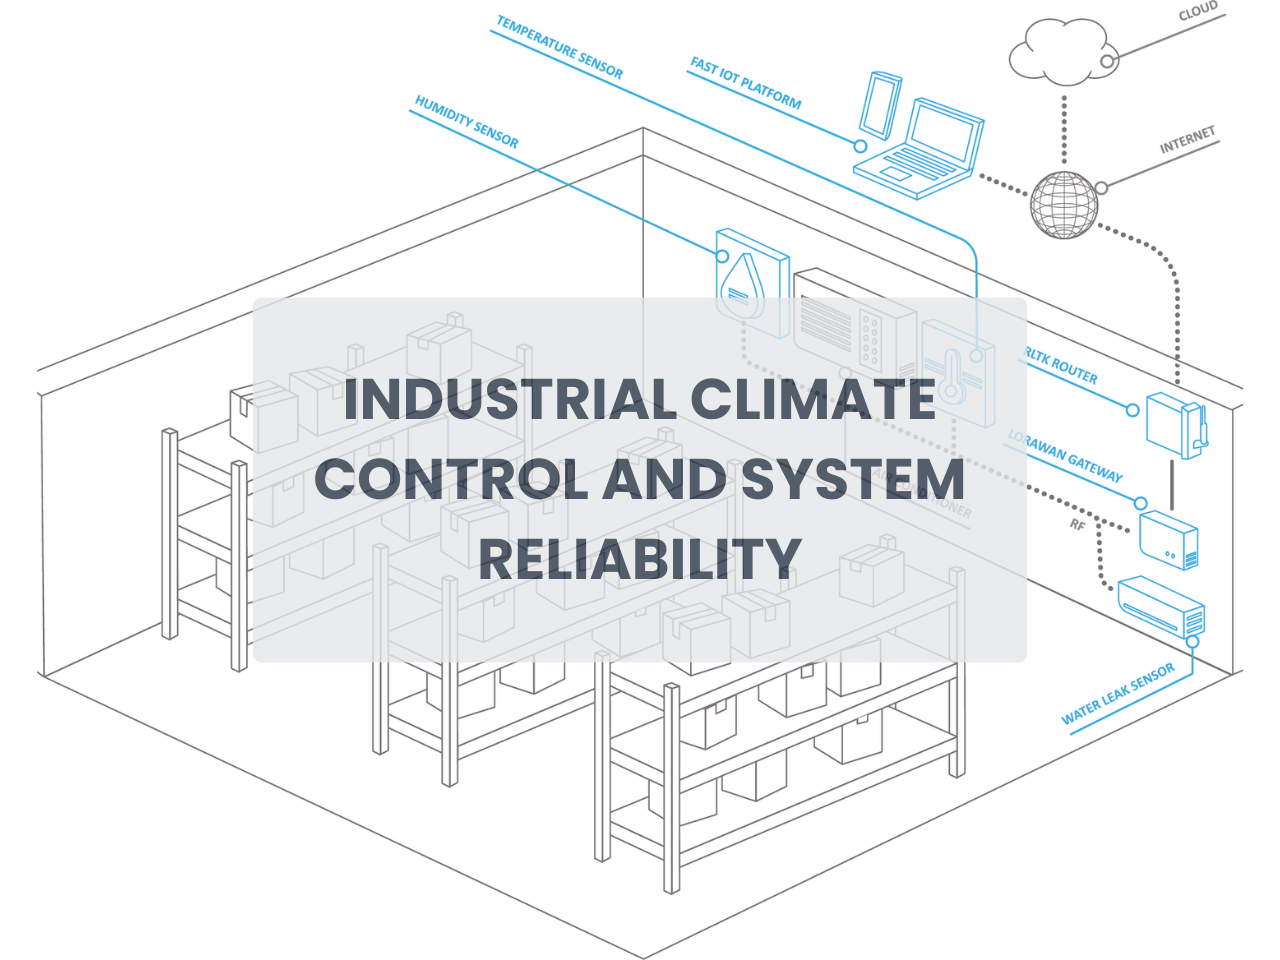 INDUSTRIAL CLIMATE CONTROL AND SYSTEM RELIABILITY